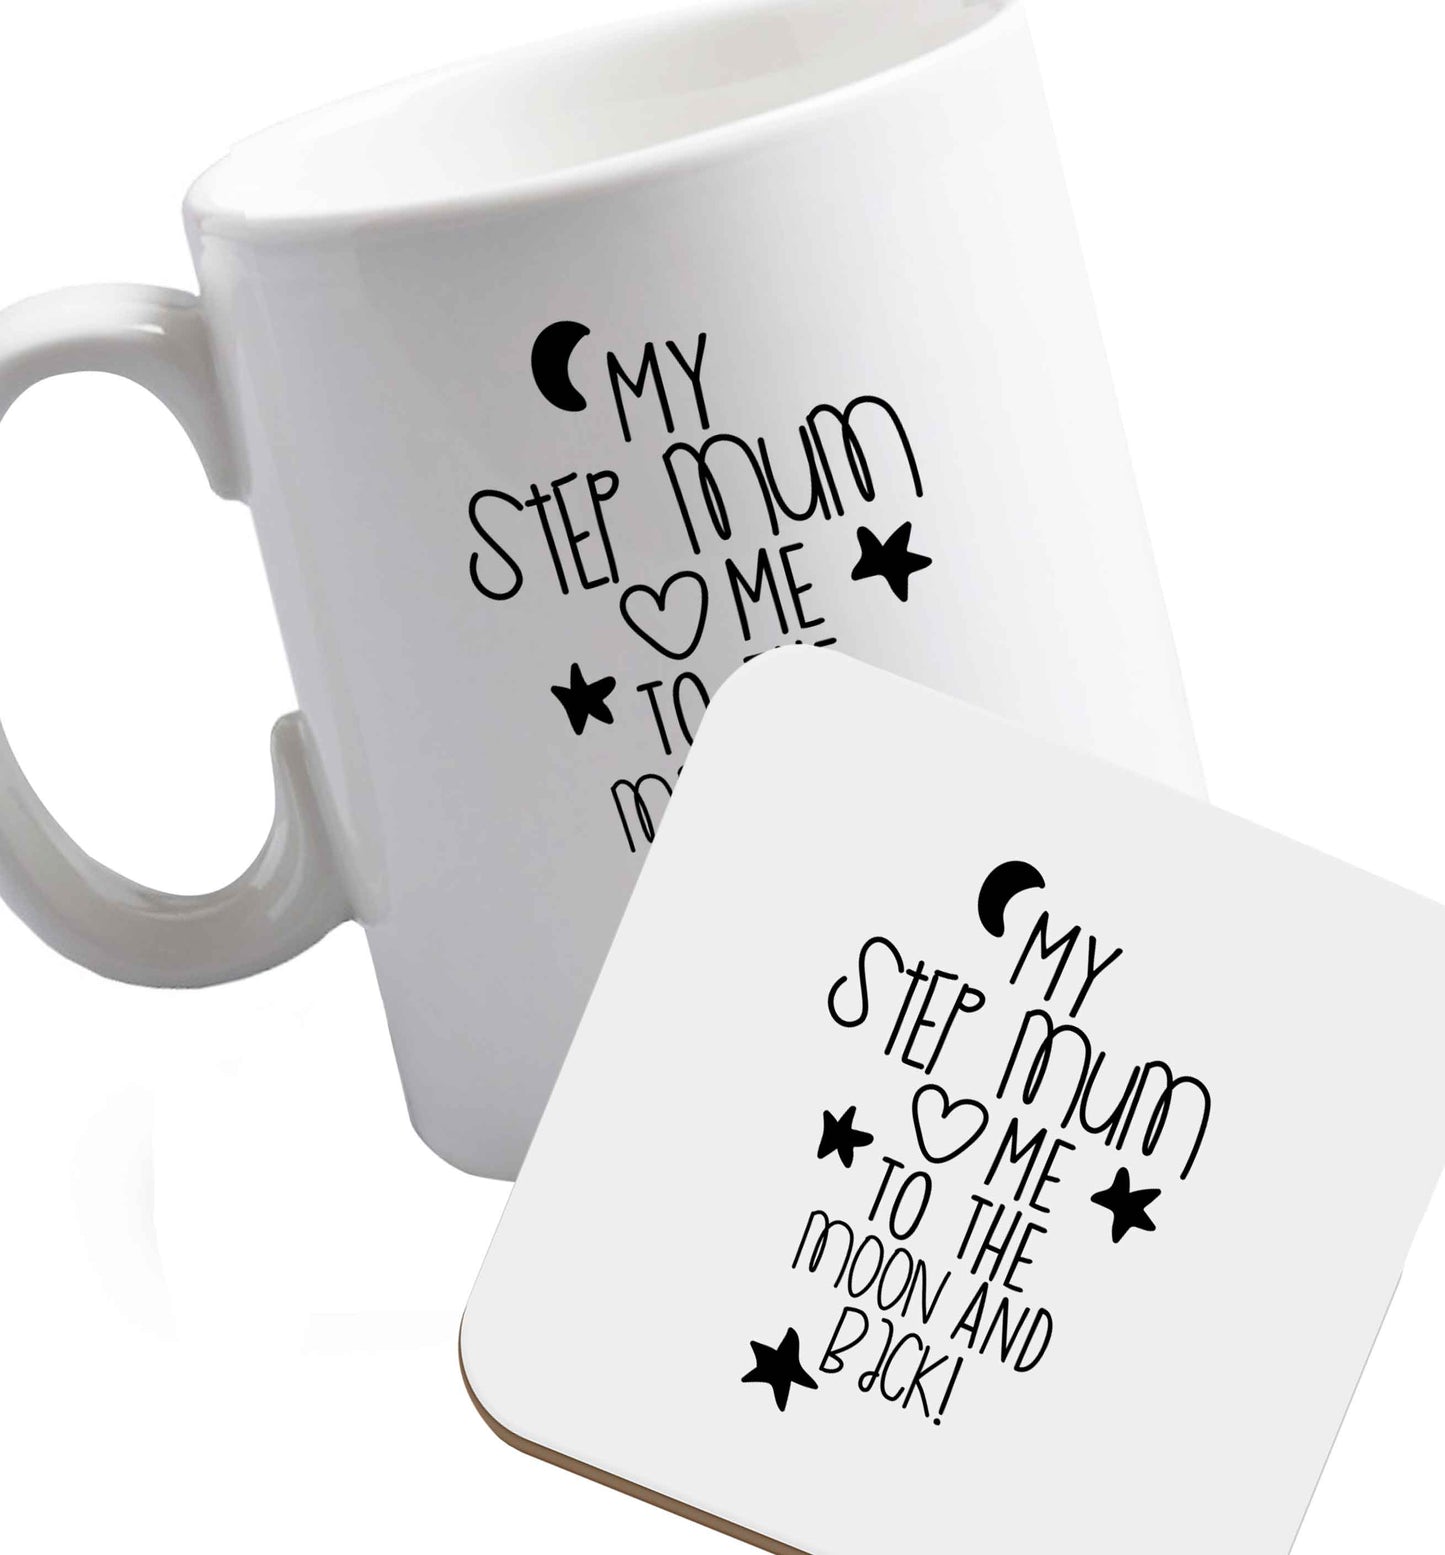 10 oz My step-mum loves me to the moon and back ceramic mug and coaster set right handed